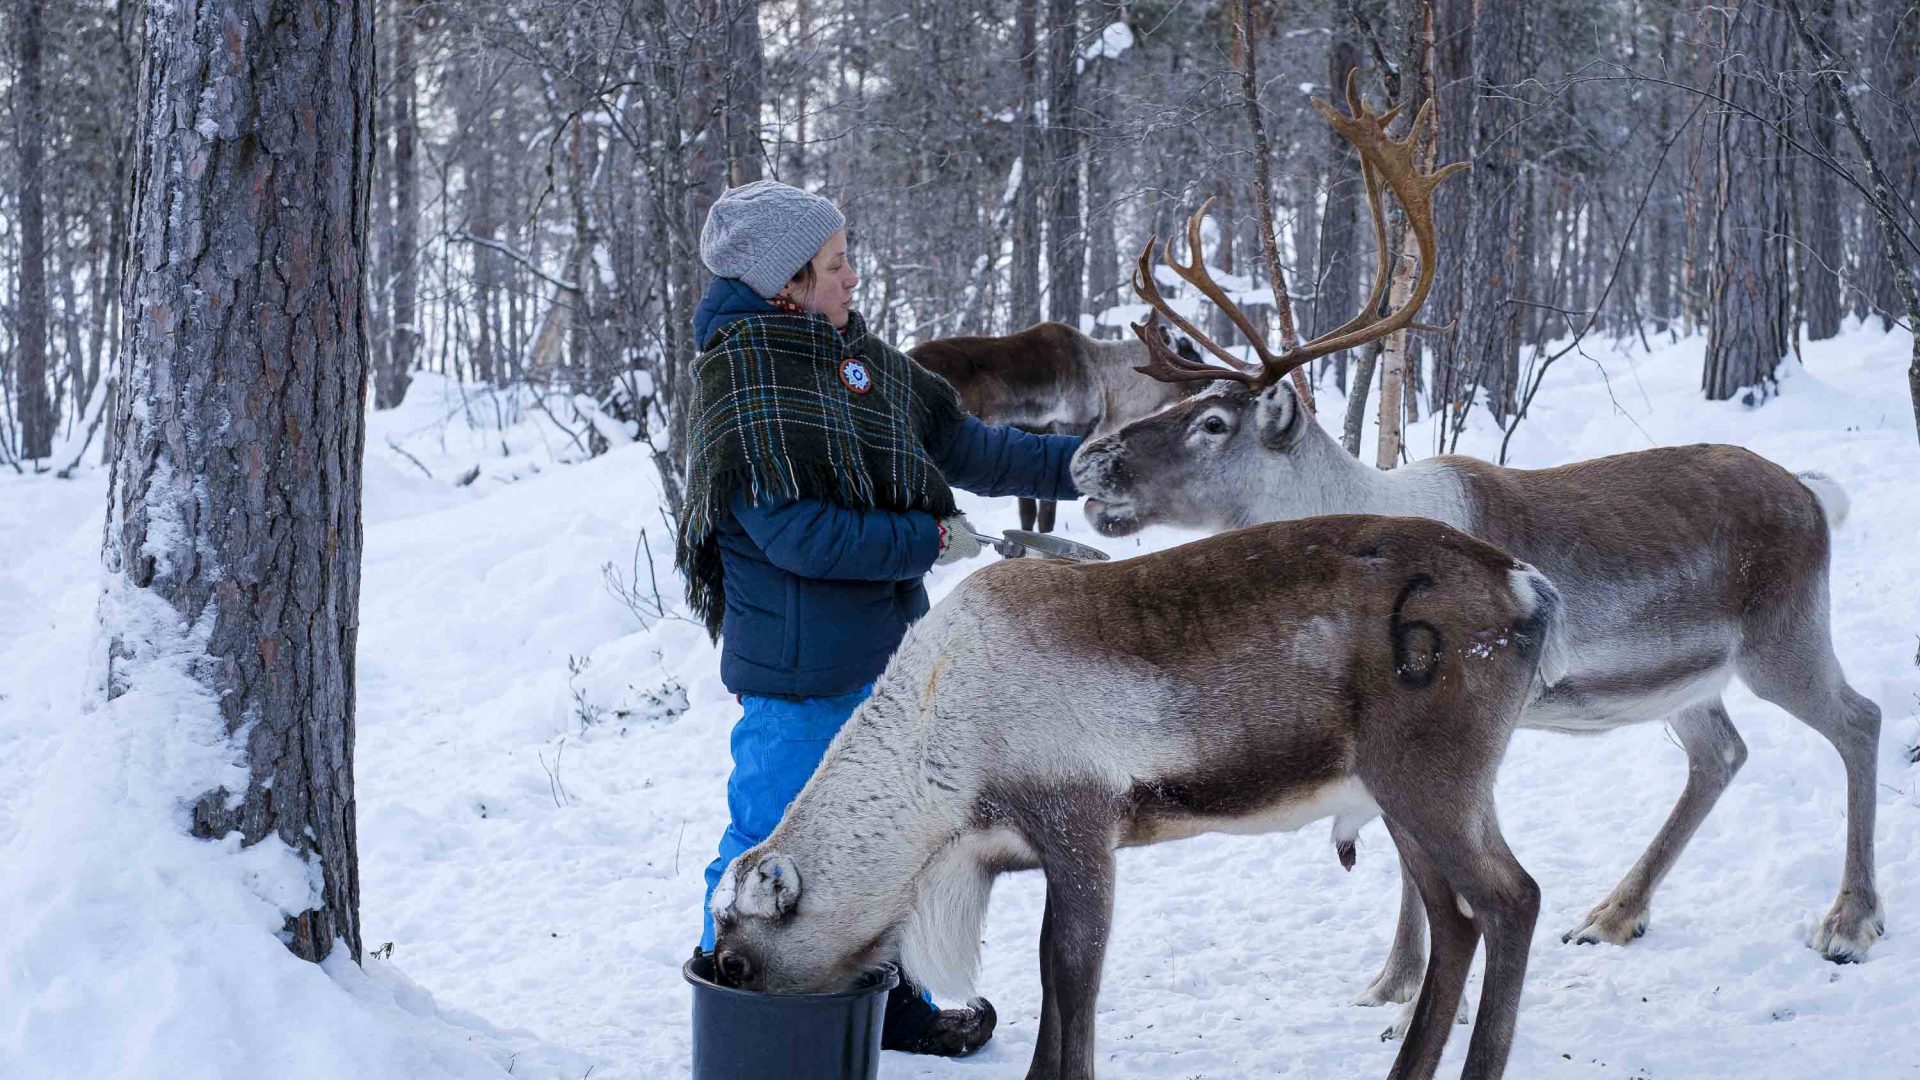 Can new best-practice visitor guidelines better protect Finland’s Sámi culture and heritage?